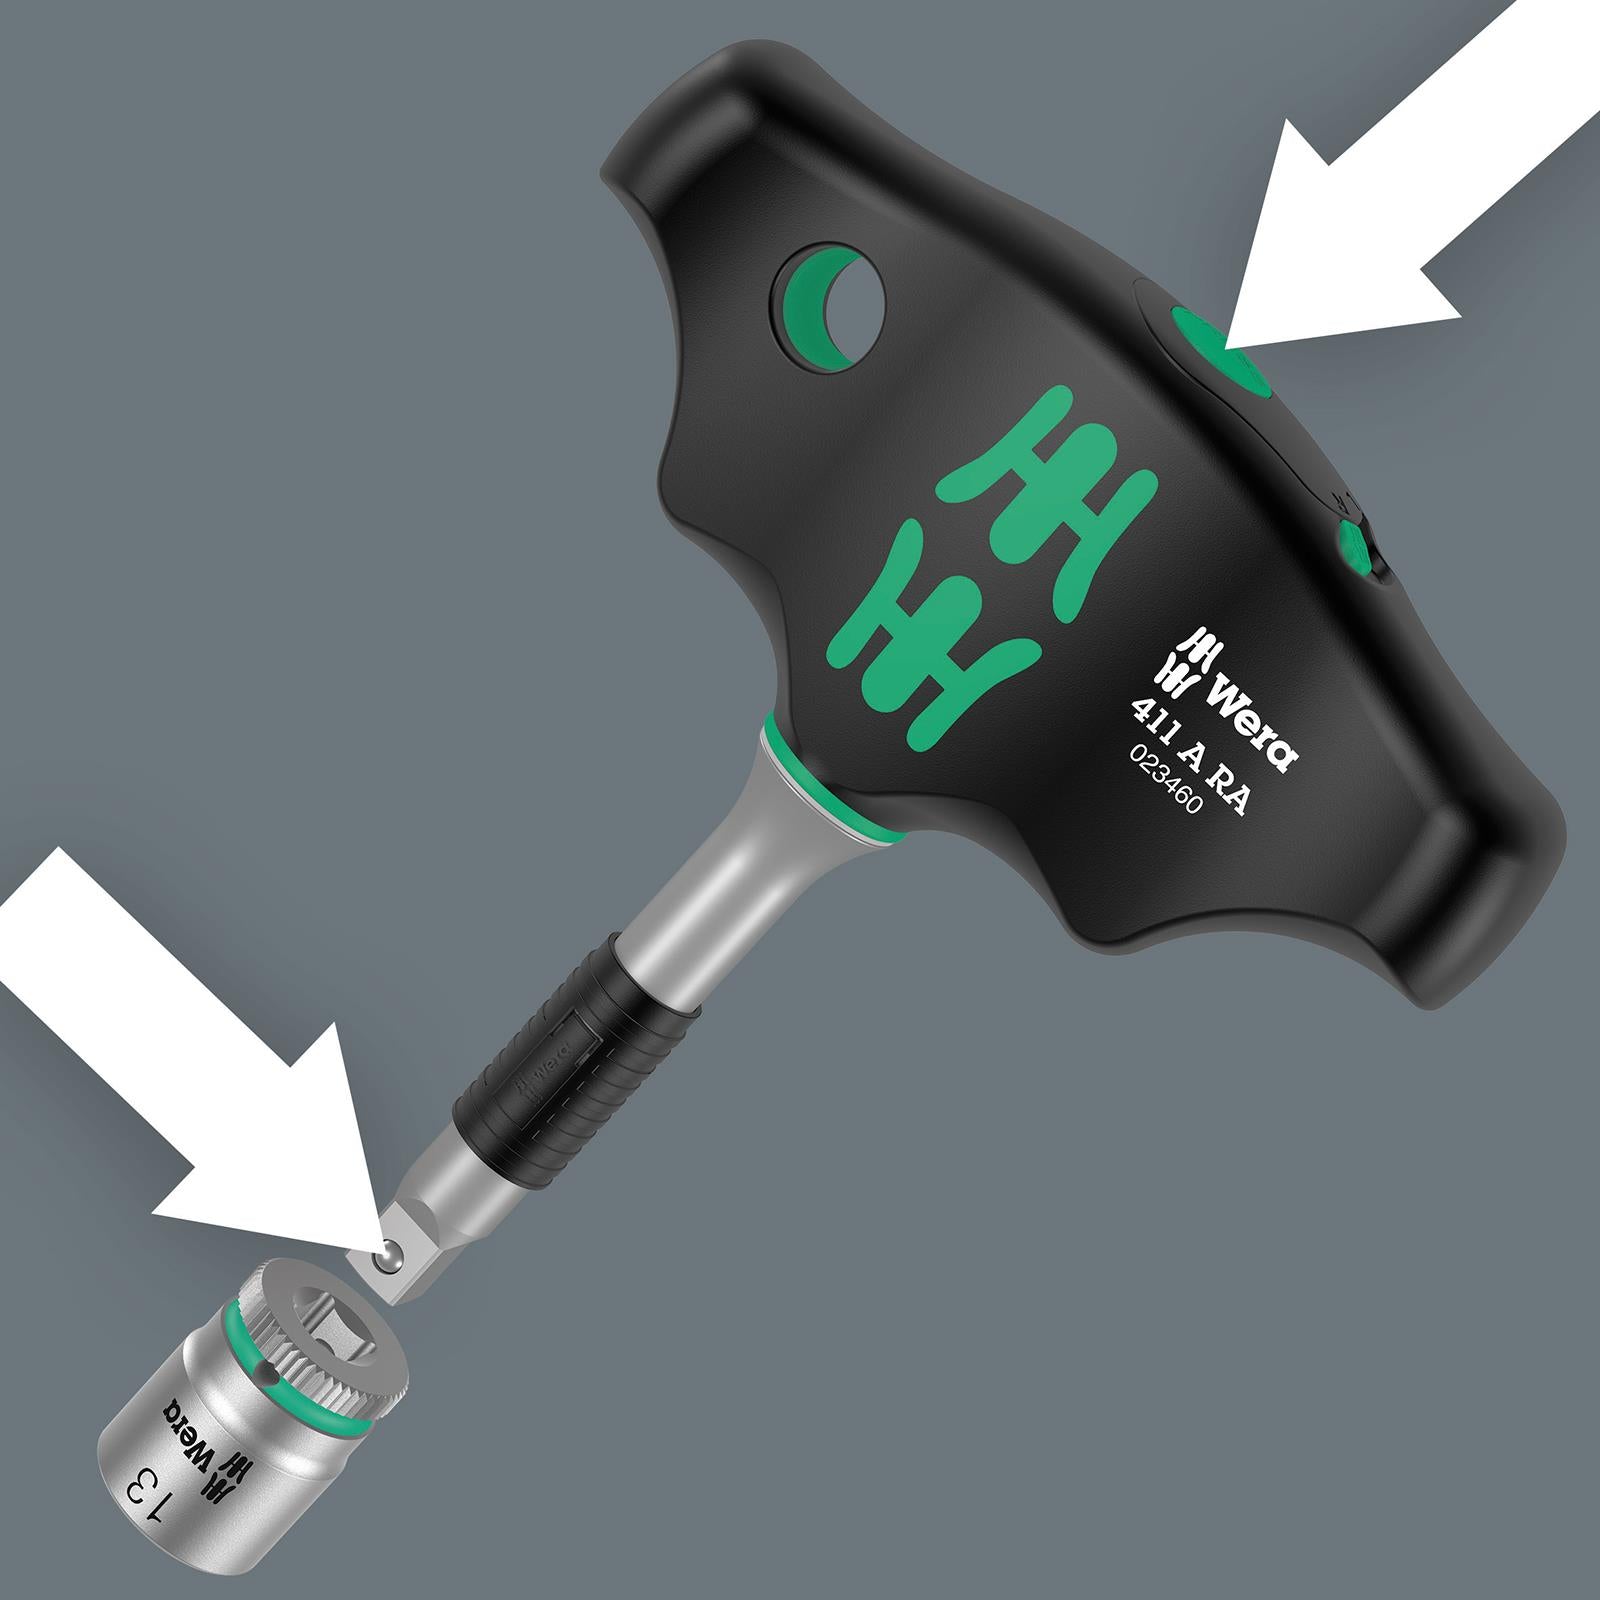 Wera T-Handle Adaptor Screwdriver 1/4" Drive with Ratchet Function 411 A RA